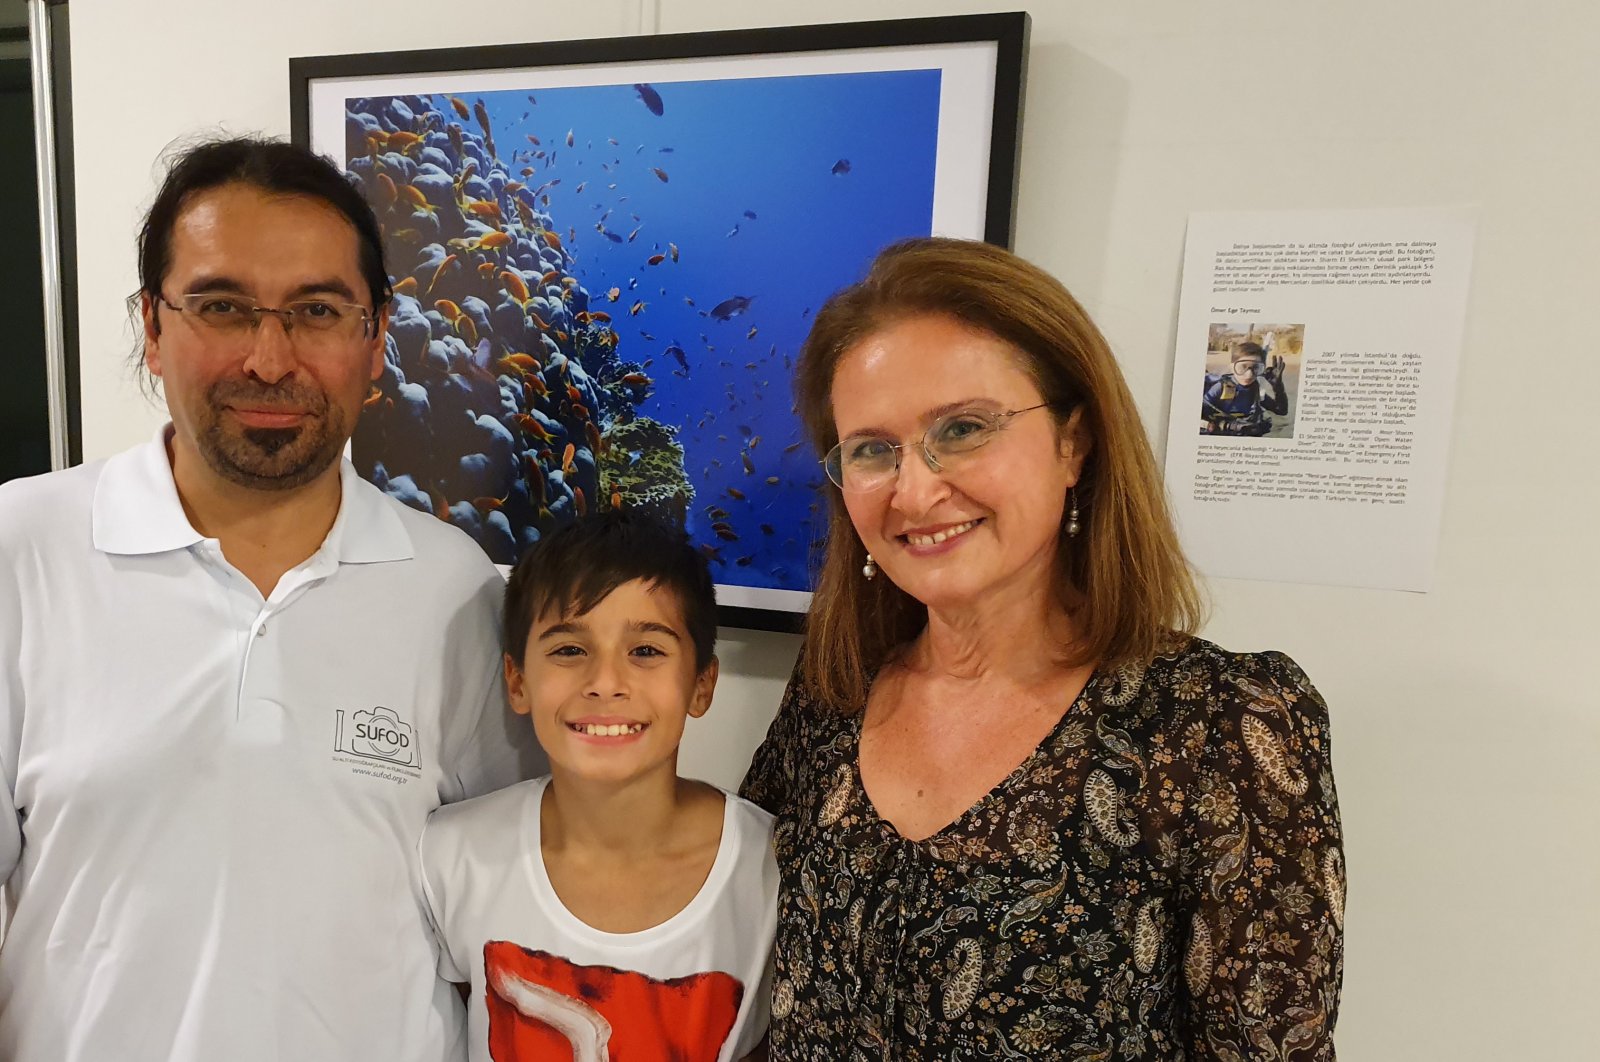 Tolga (L), Ömer Ege (C) and Bahar Taymaz (R) pose in front of one of the many underwater photos they have taken. (All photos courtesy of Tolga Taymaz)